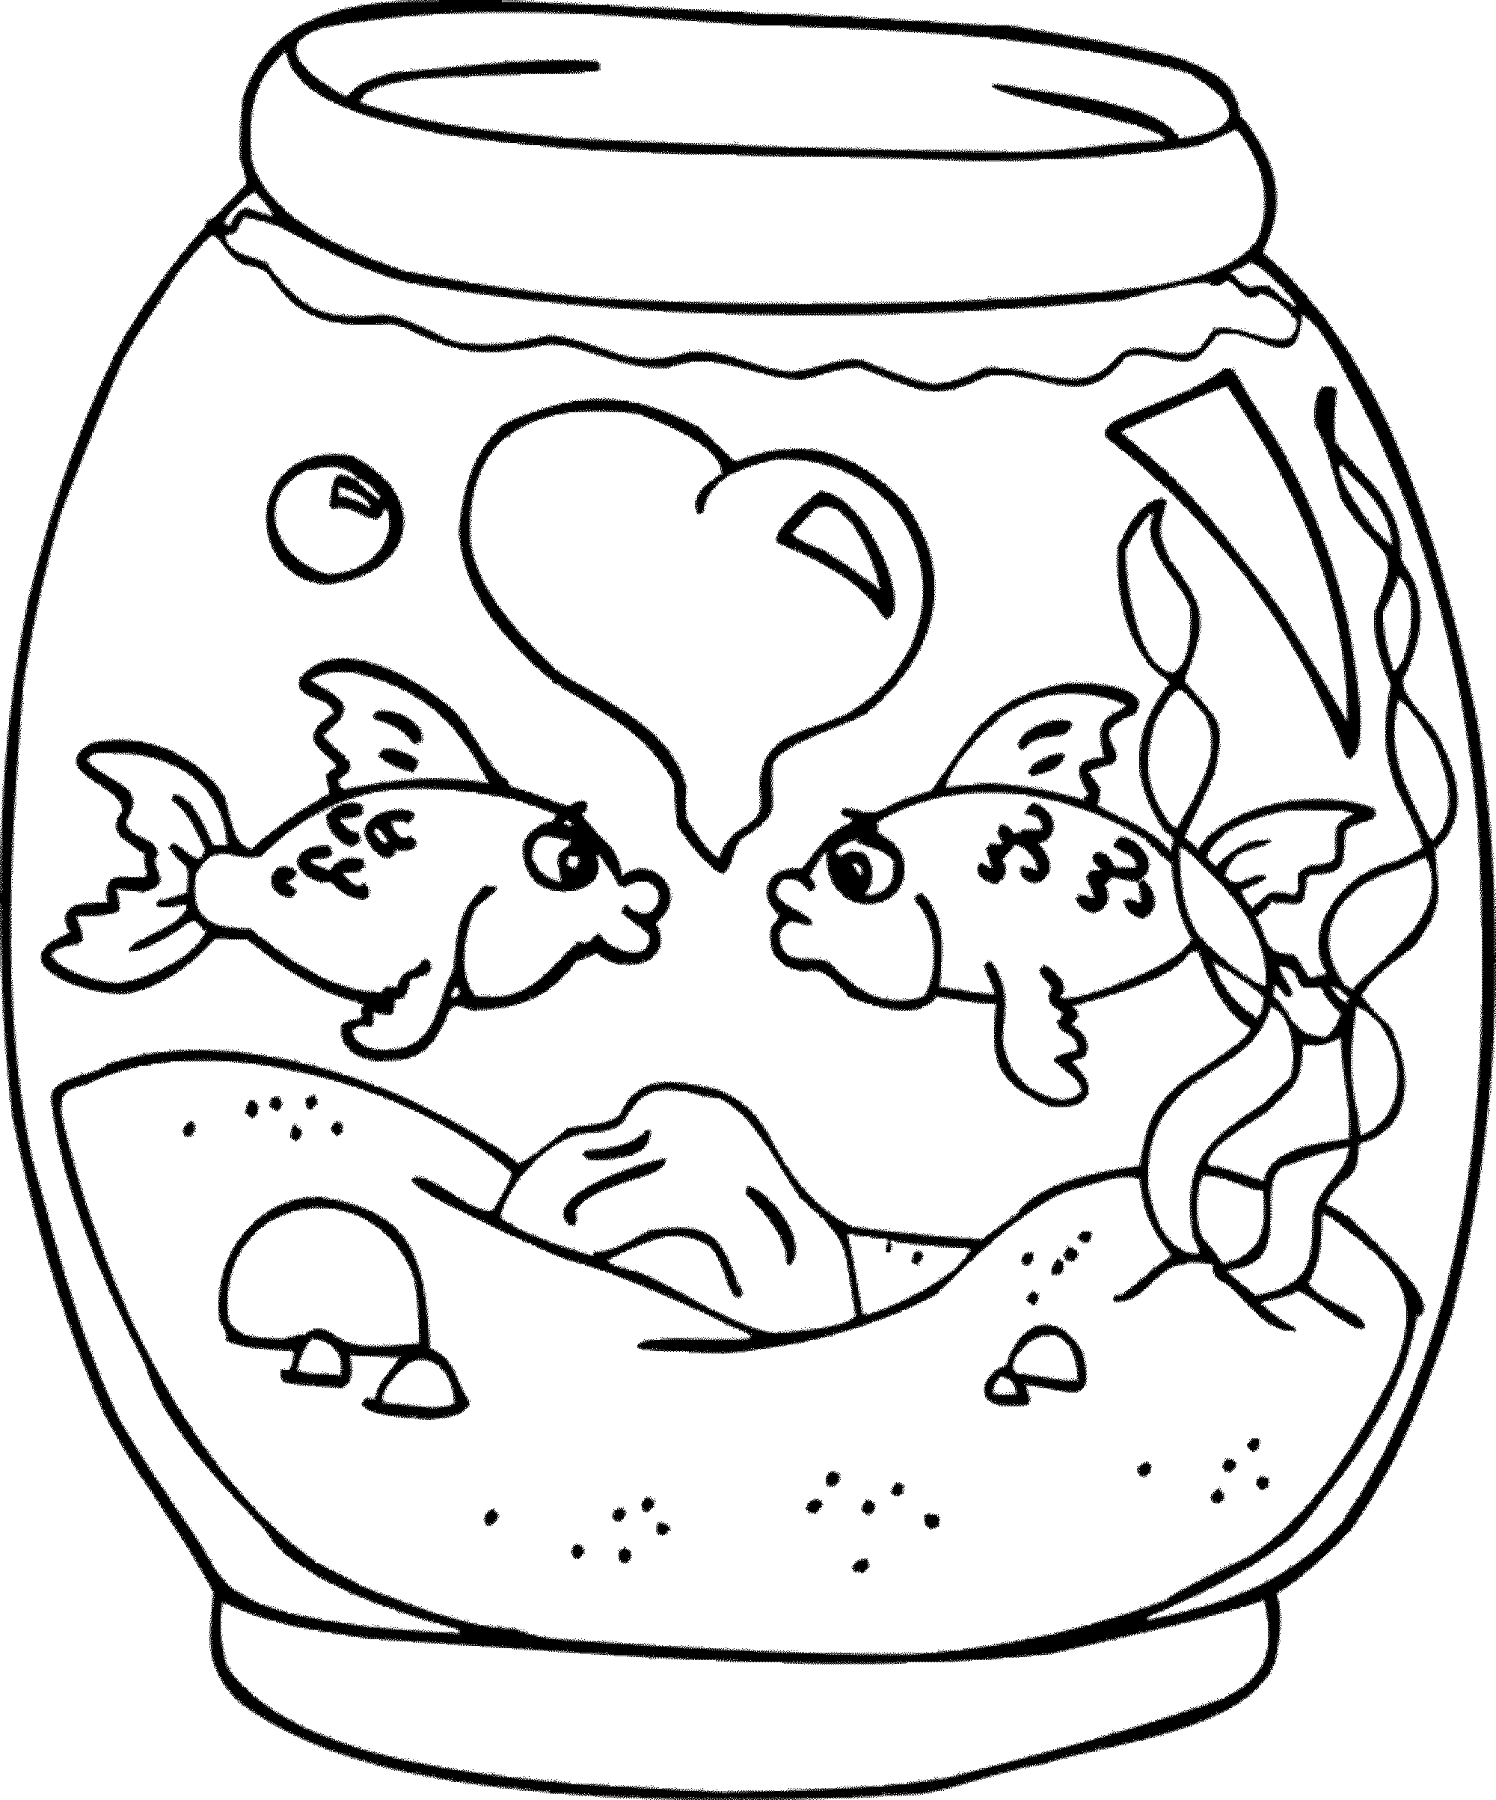 fish picture to color fish coloring page 2016 printable activity shelter picture fish color to 